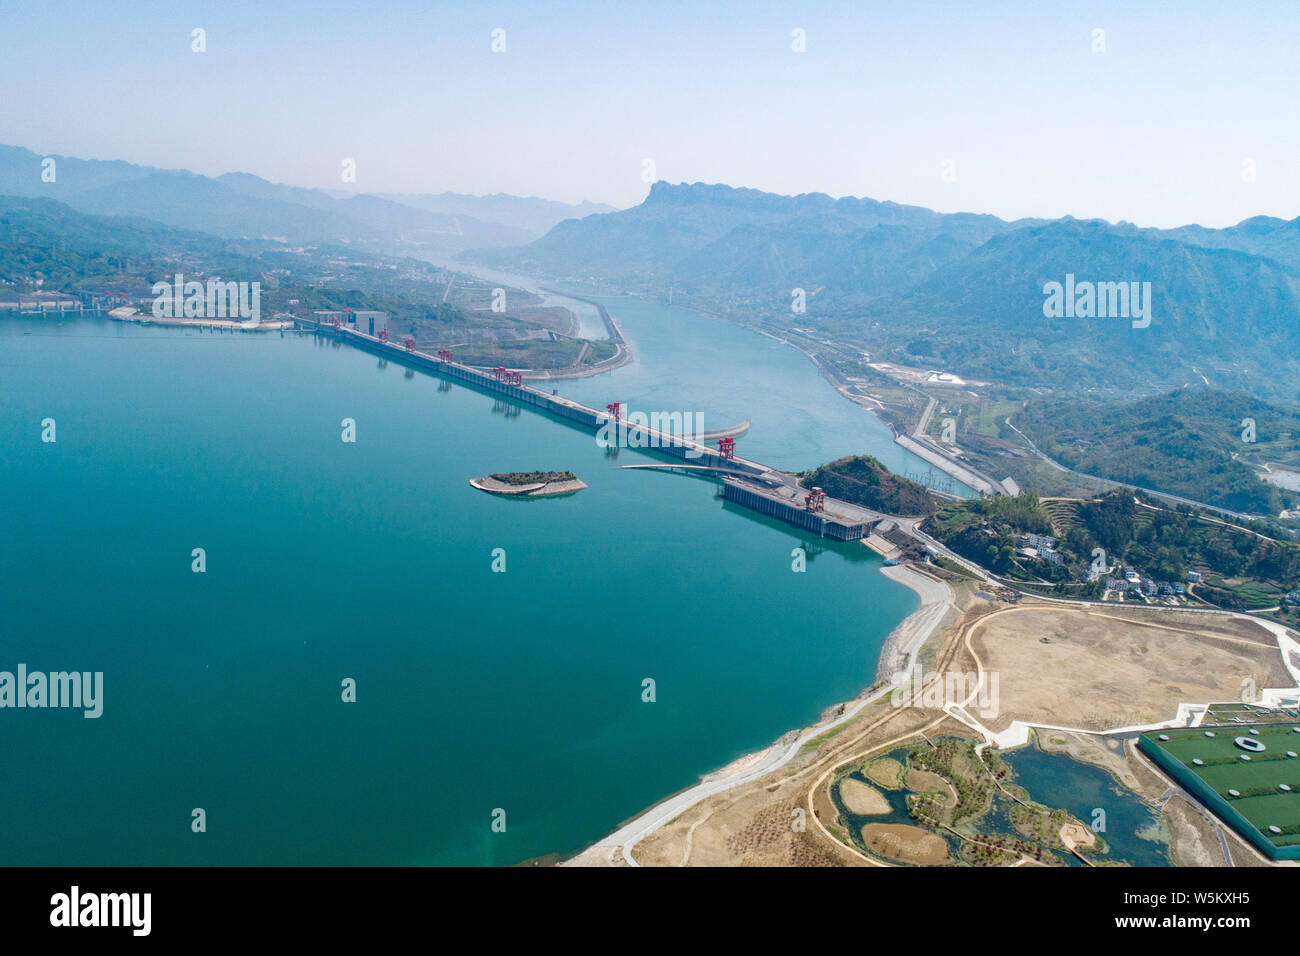 An aerial view of the Three Gorges Dam operated by China Three Gorges Corporation on the Yangtze River in Zigui county, Yichang city, central China's Stock Photo